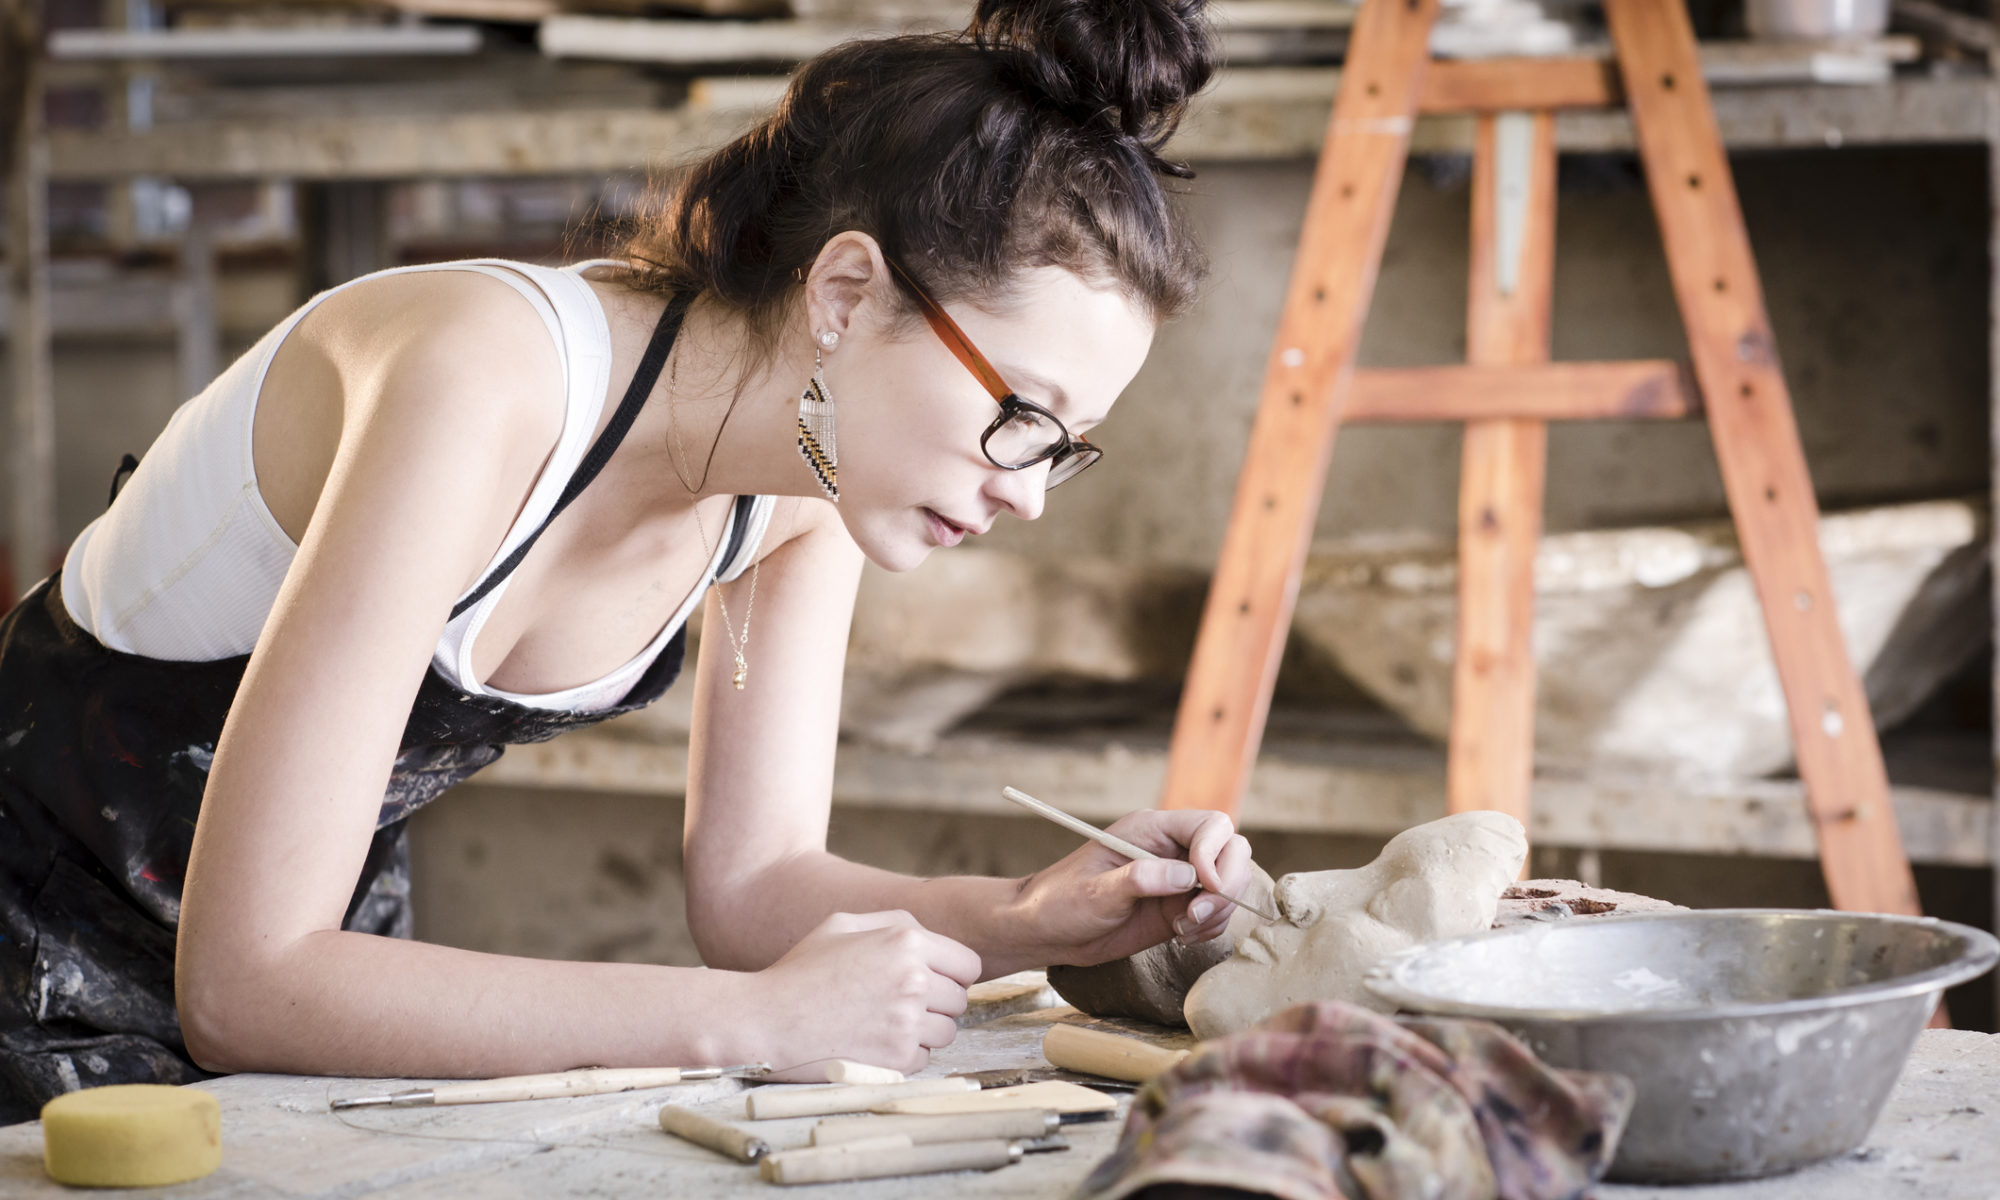 A caucasian female potter leaning over a workbench adding finishing touches to a piece of pottery. She is wearing a white strap top with a black apron on top